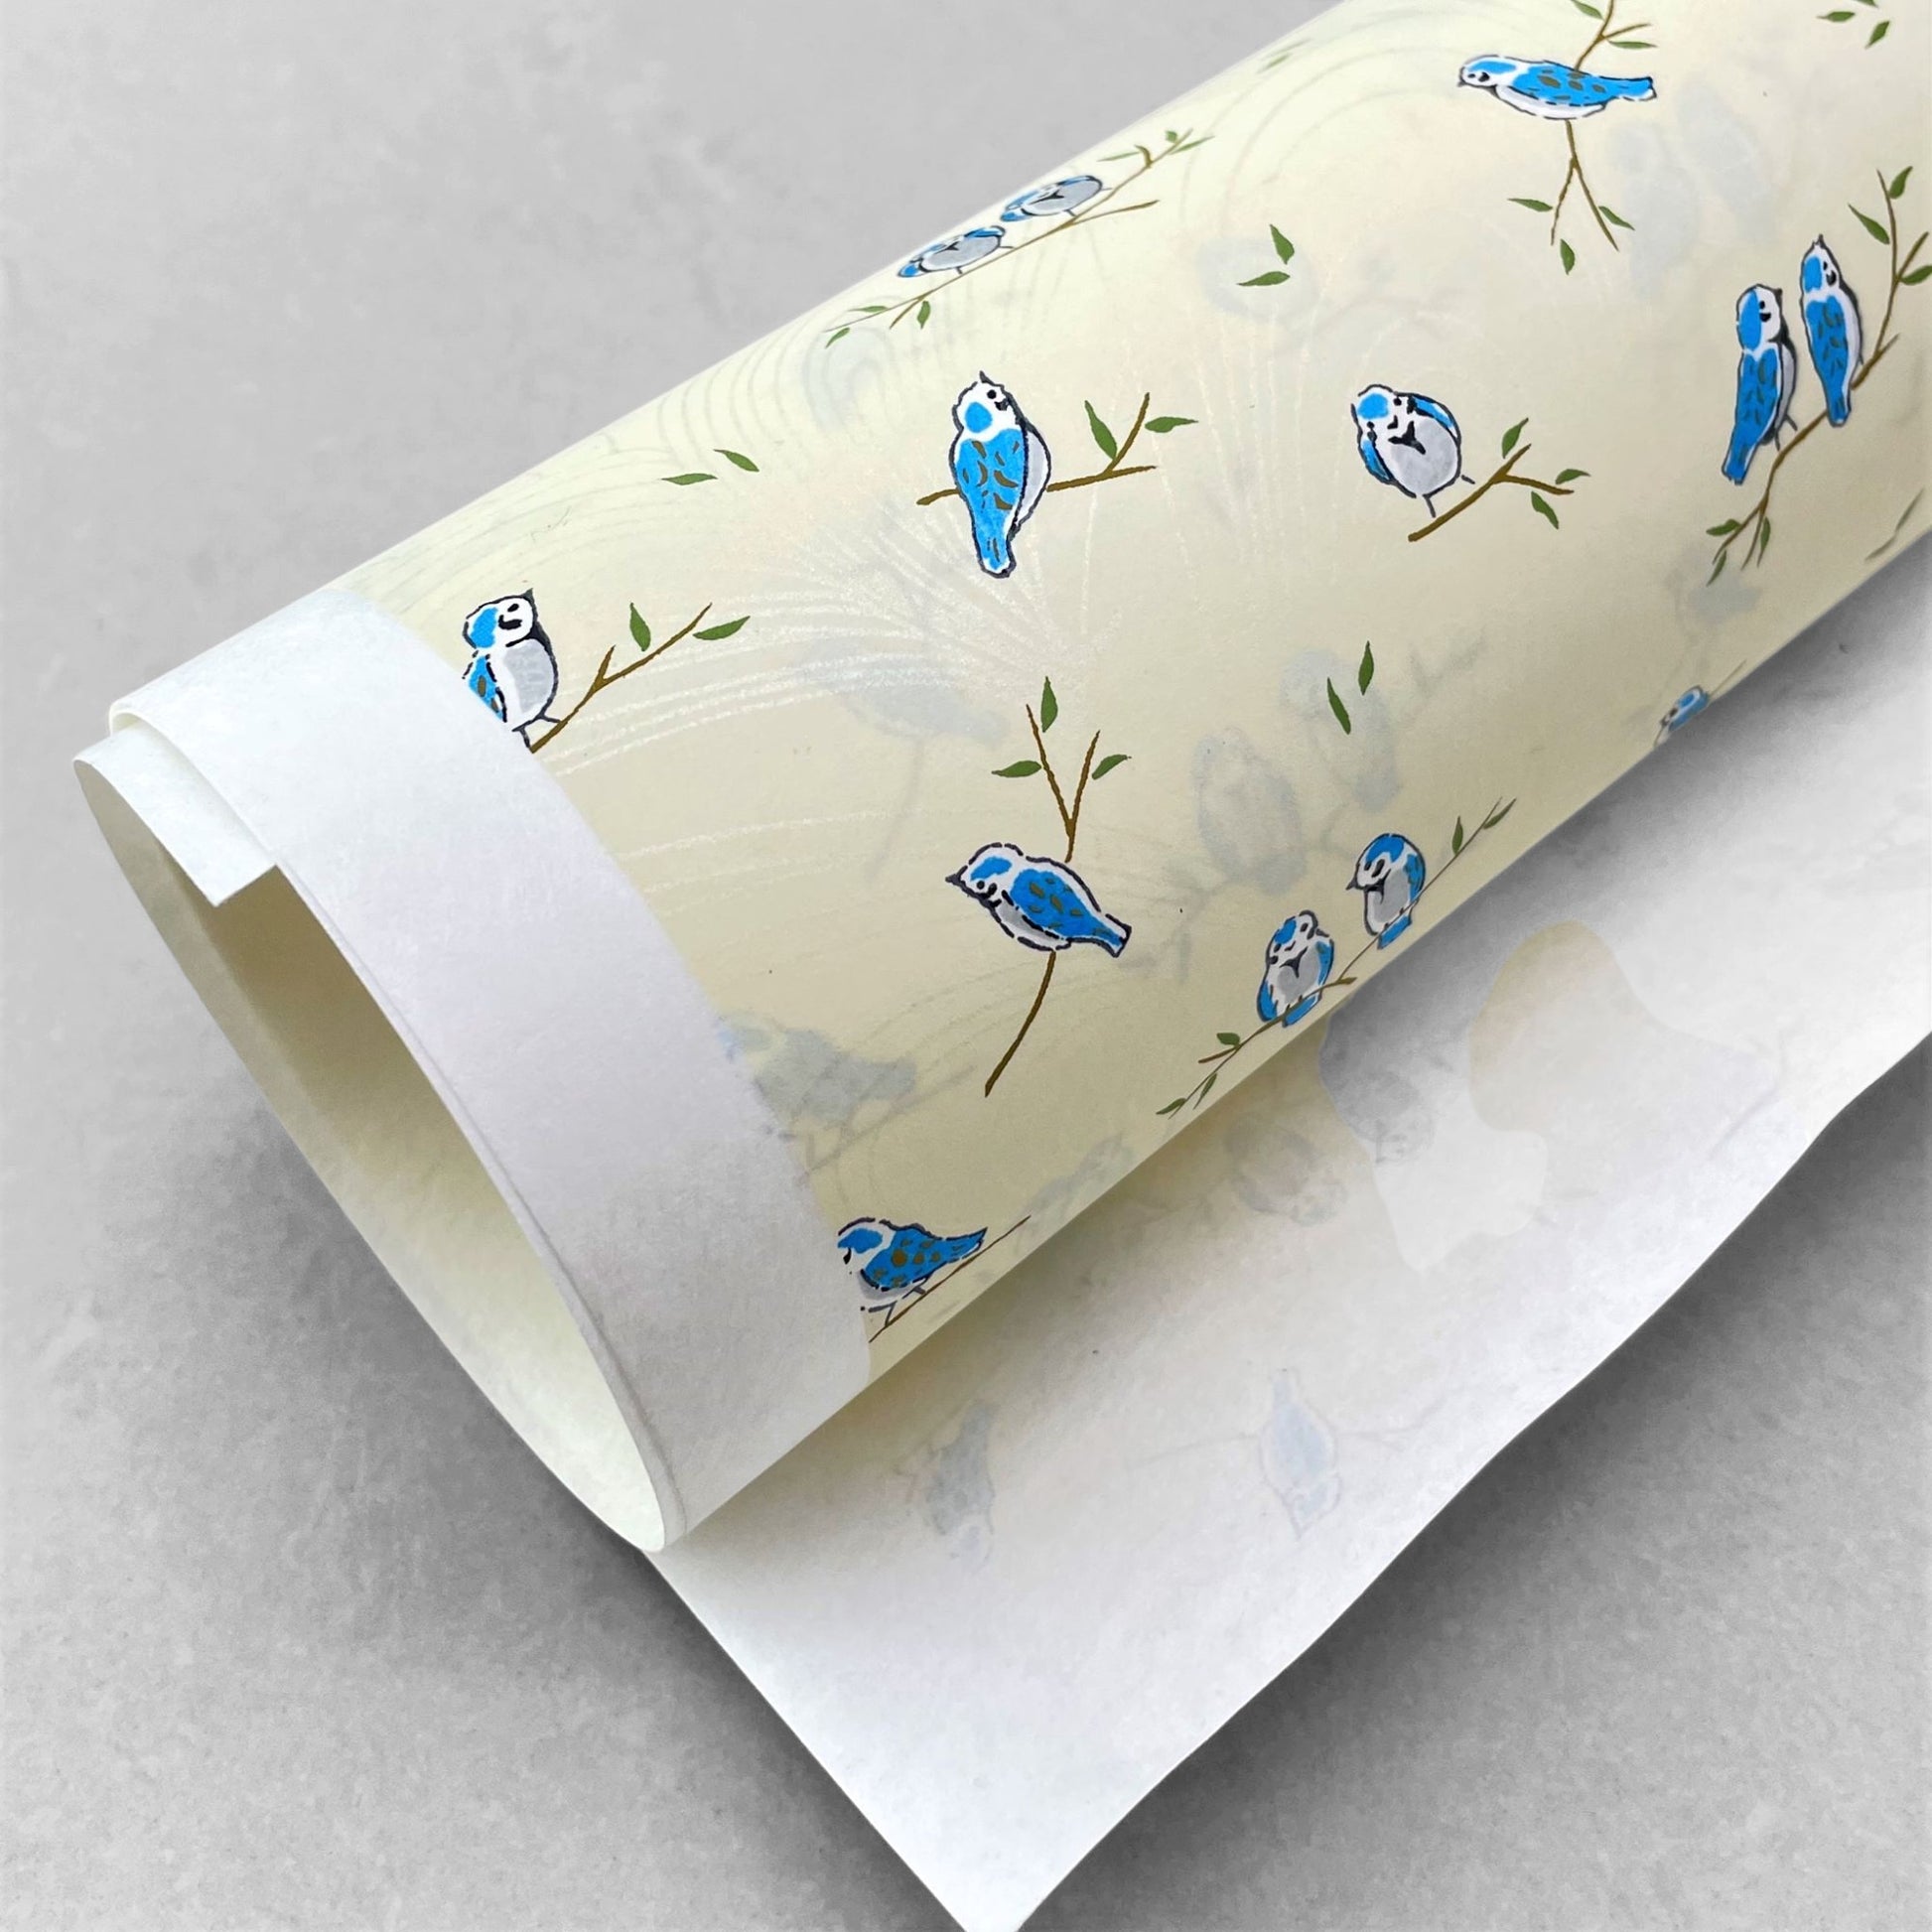 japanese silk-screen handmade paper showing blue birds on branches, the backdrop is cream with opalescent butterflies